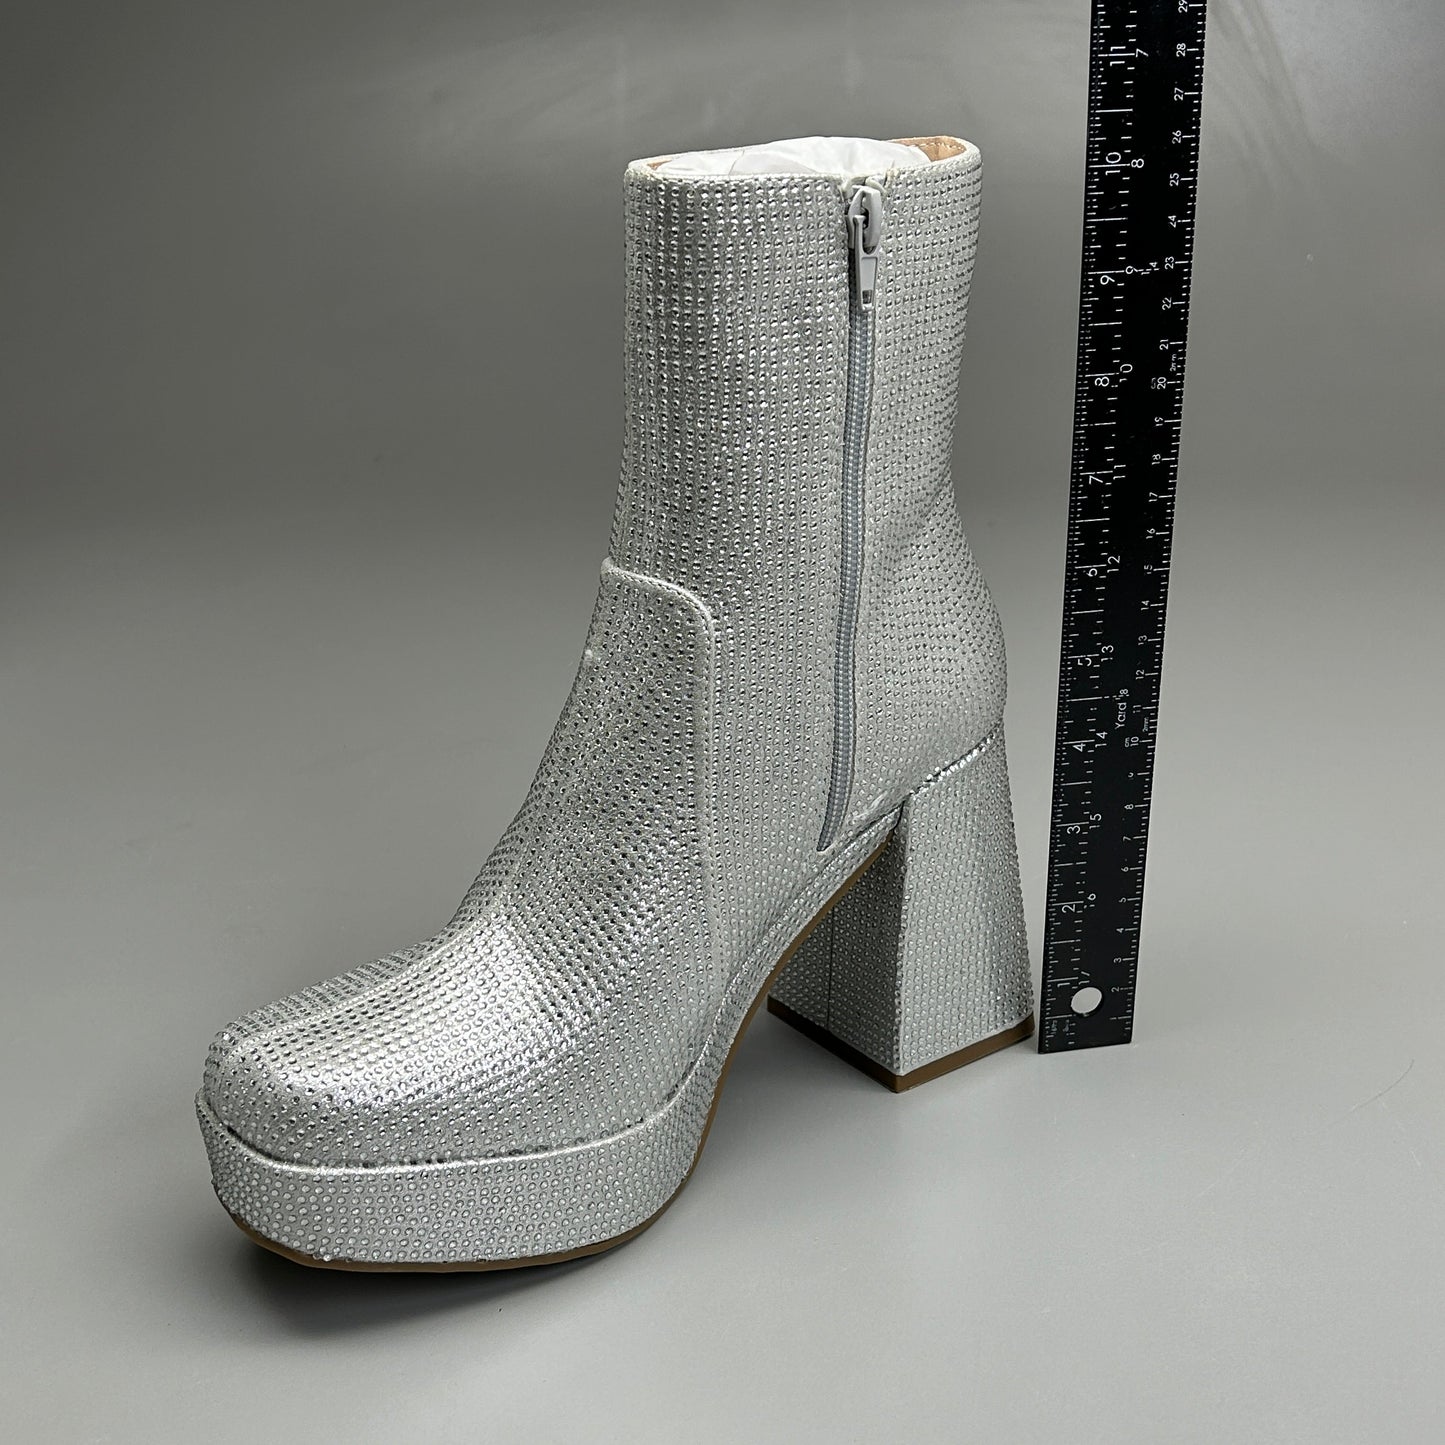 MIA Iva Silver Stone Heeled Boots Women's Sz 7 Silver GS1253108 (New)